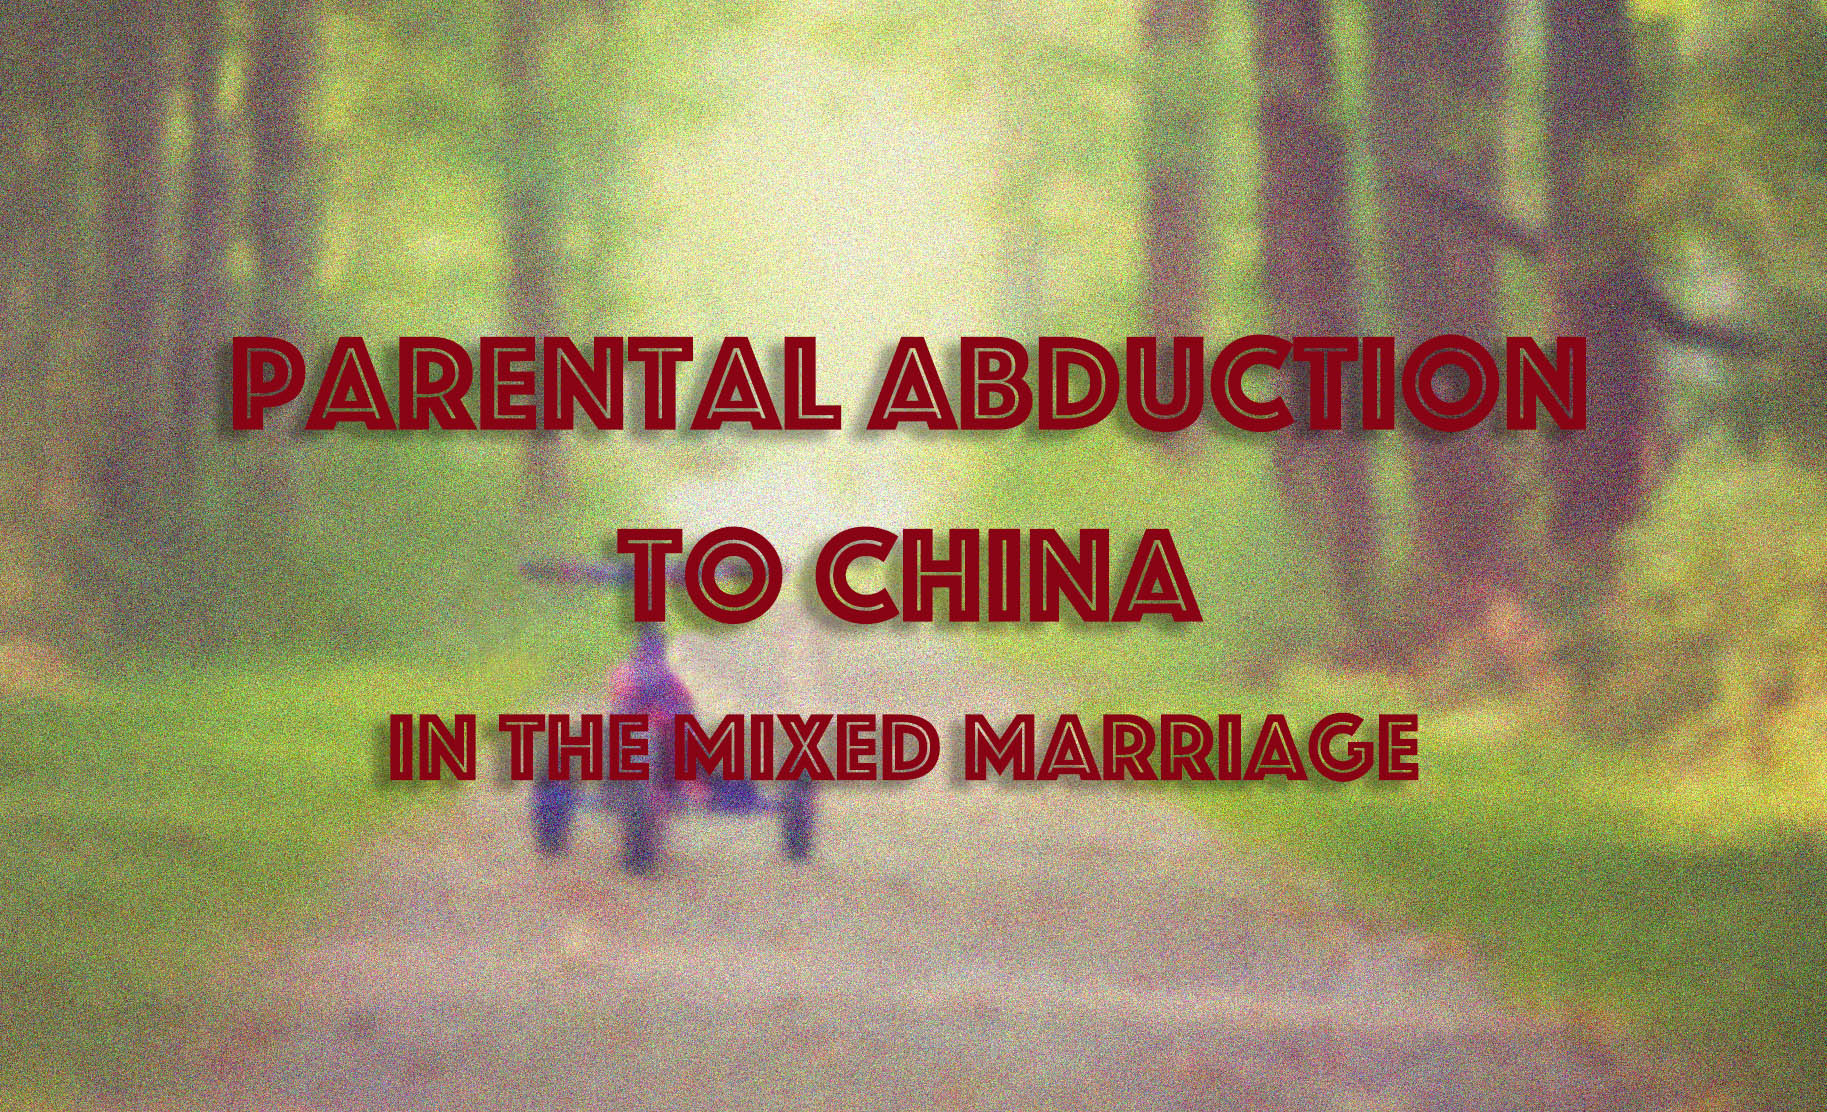 Parental ABDUCTION to China in the mixed marriage